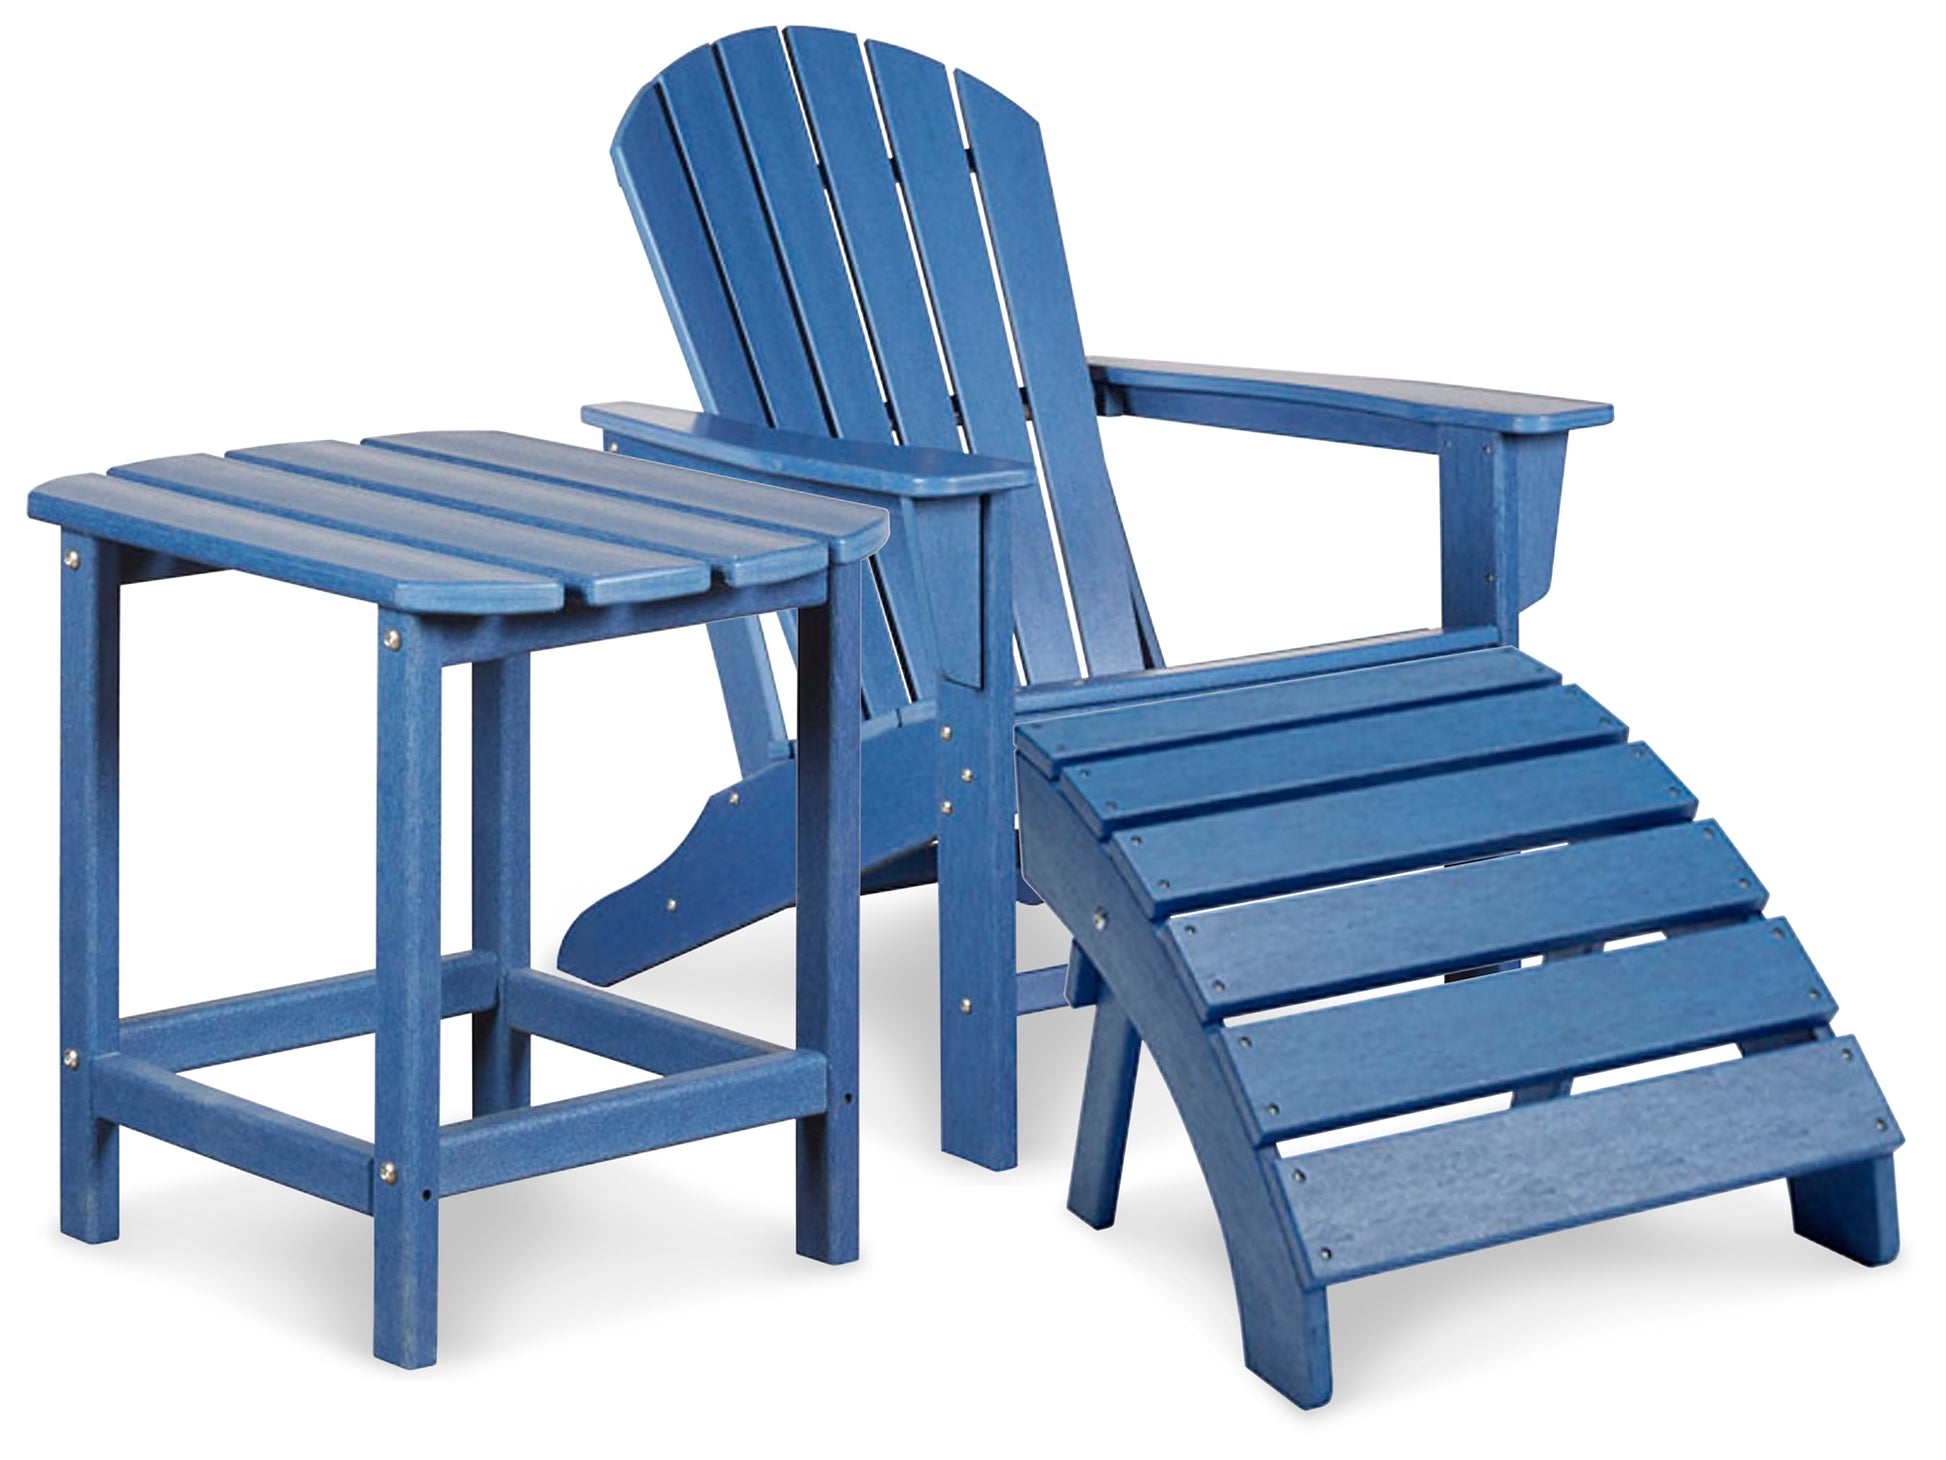 Sundown Treasure Outdoor Adirondack Chair and Ottoman with Side Table JB's Furniture  Home Furniture, Home Decor, Furniture Store